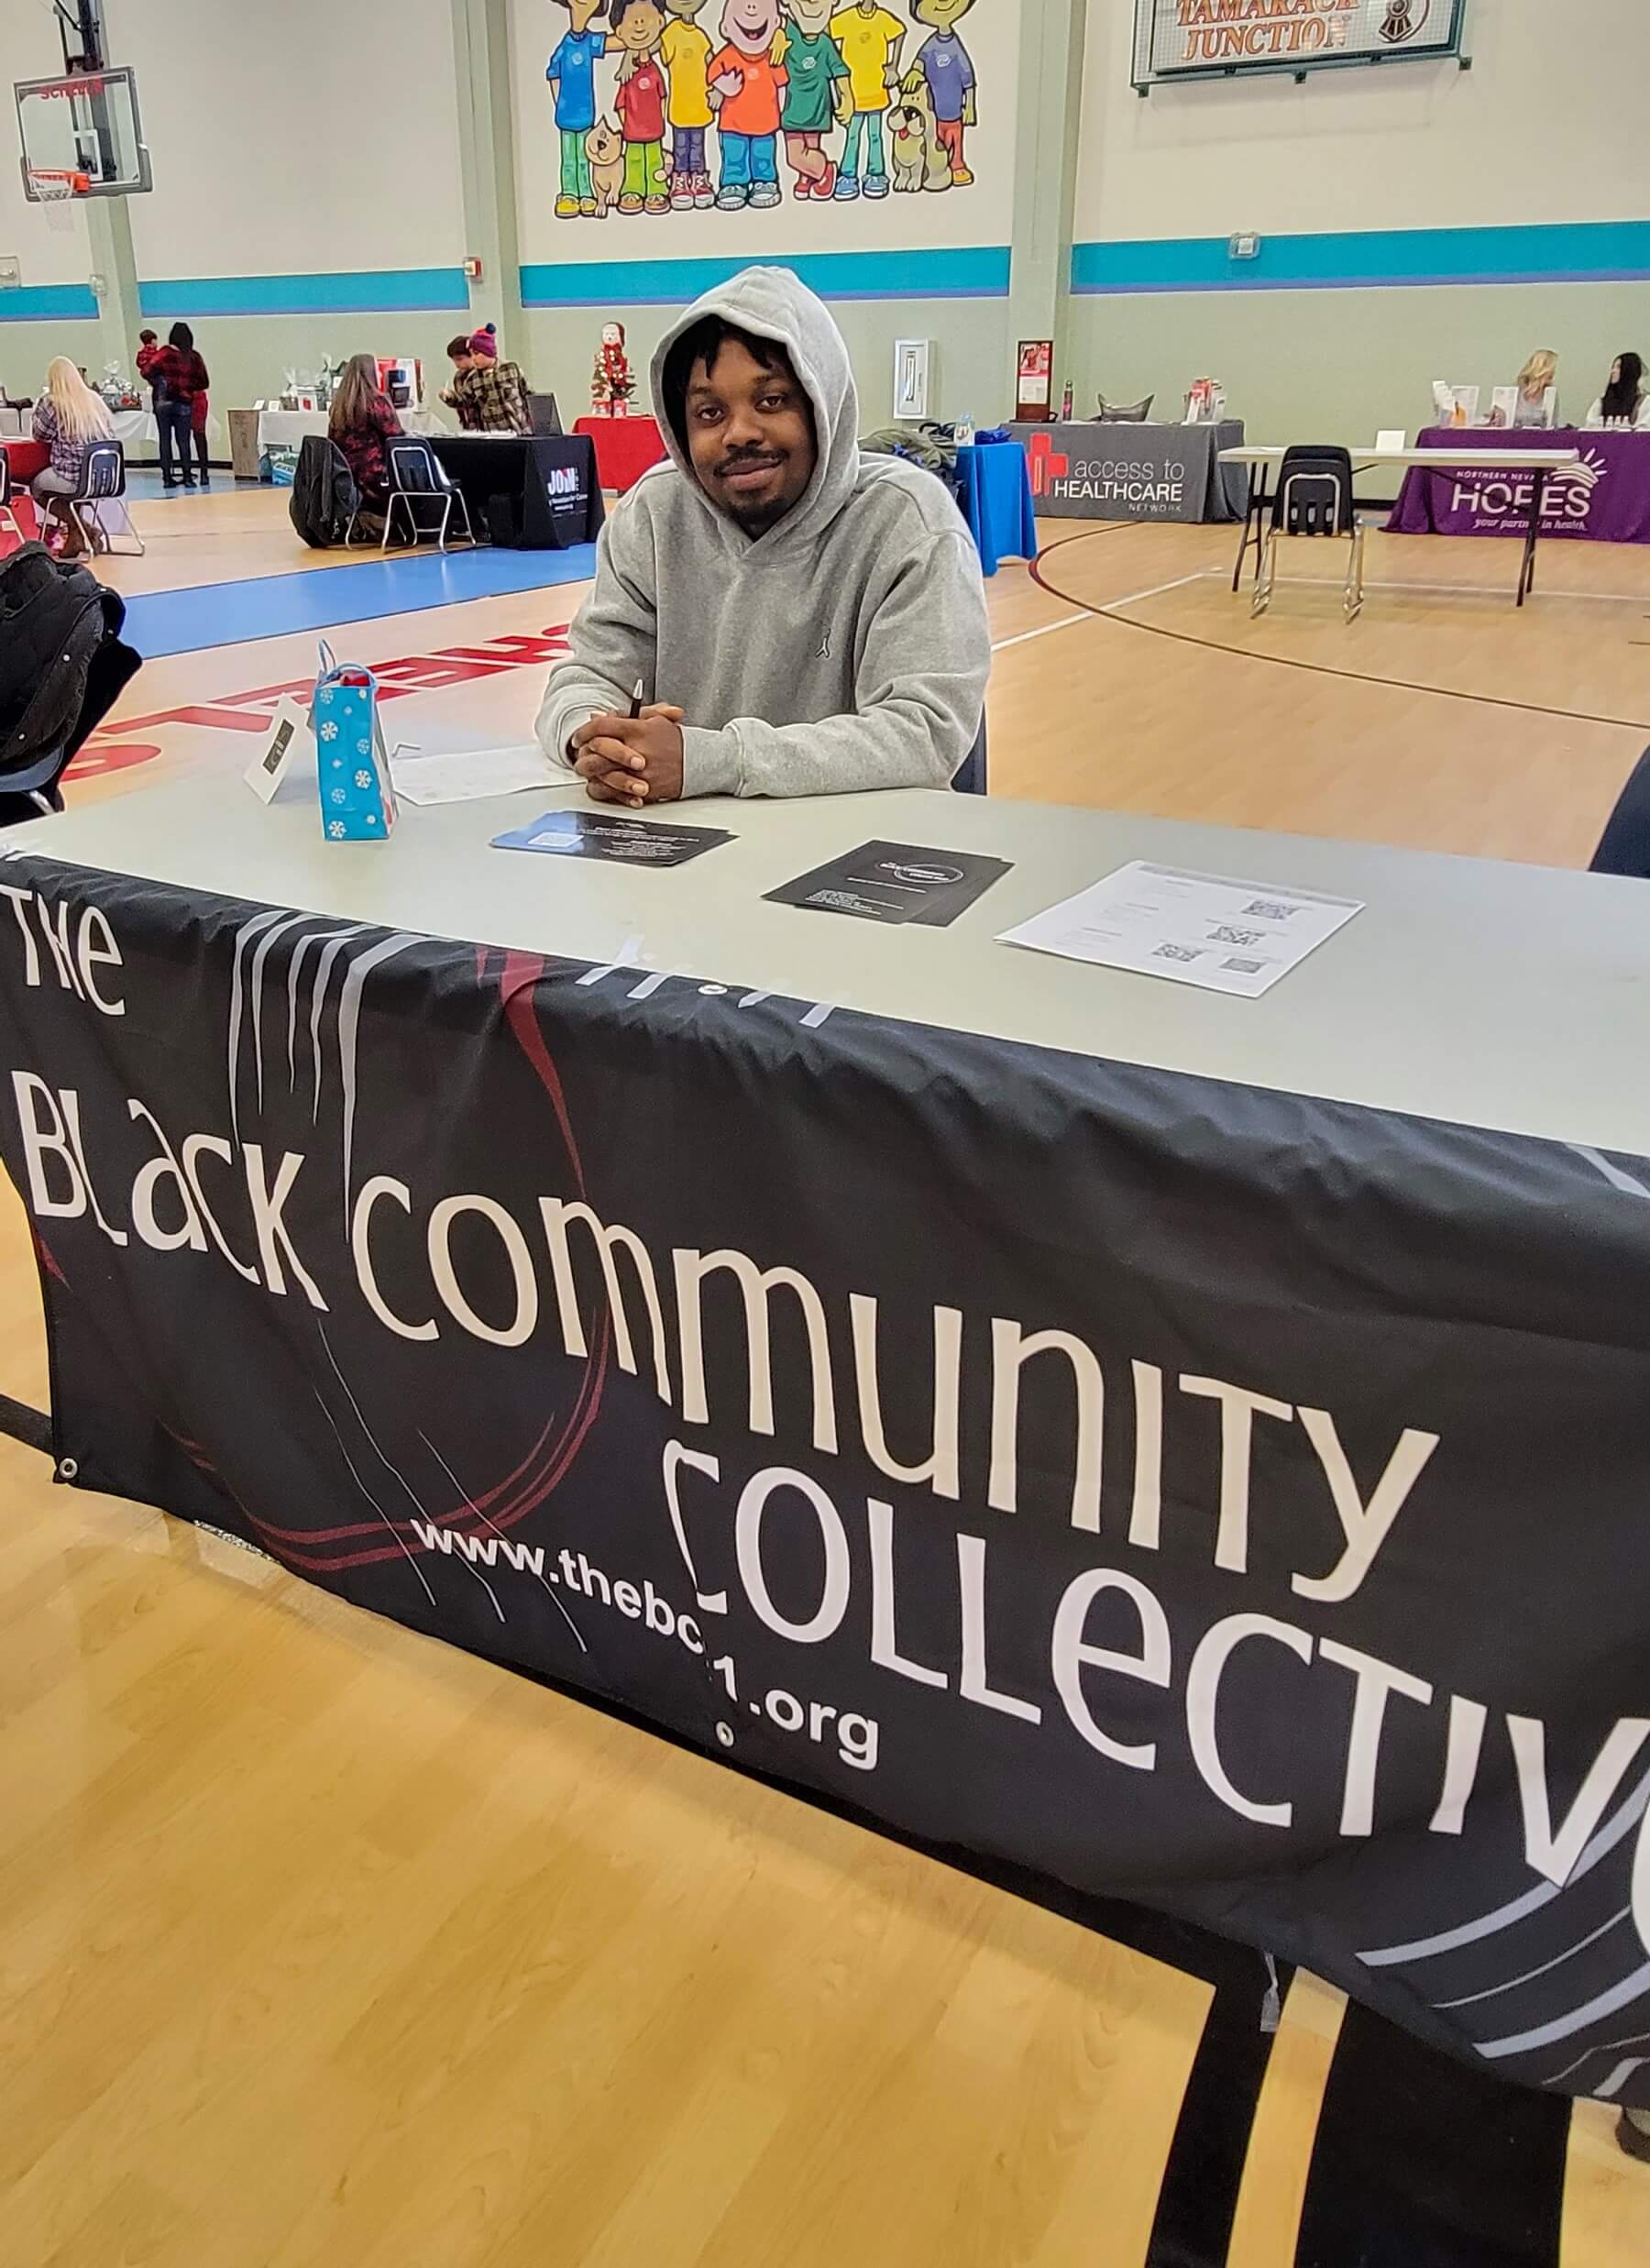 A man sitting at a table with a black community collective sign.